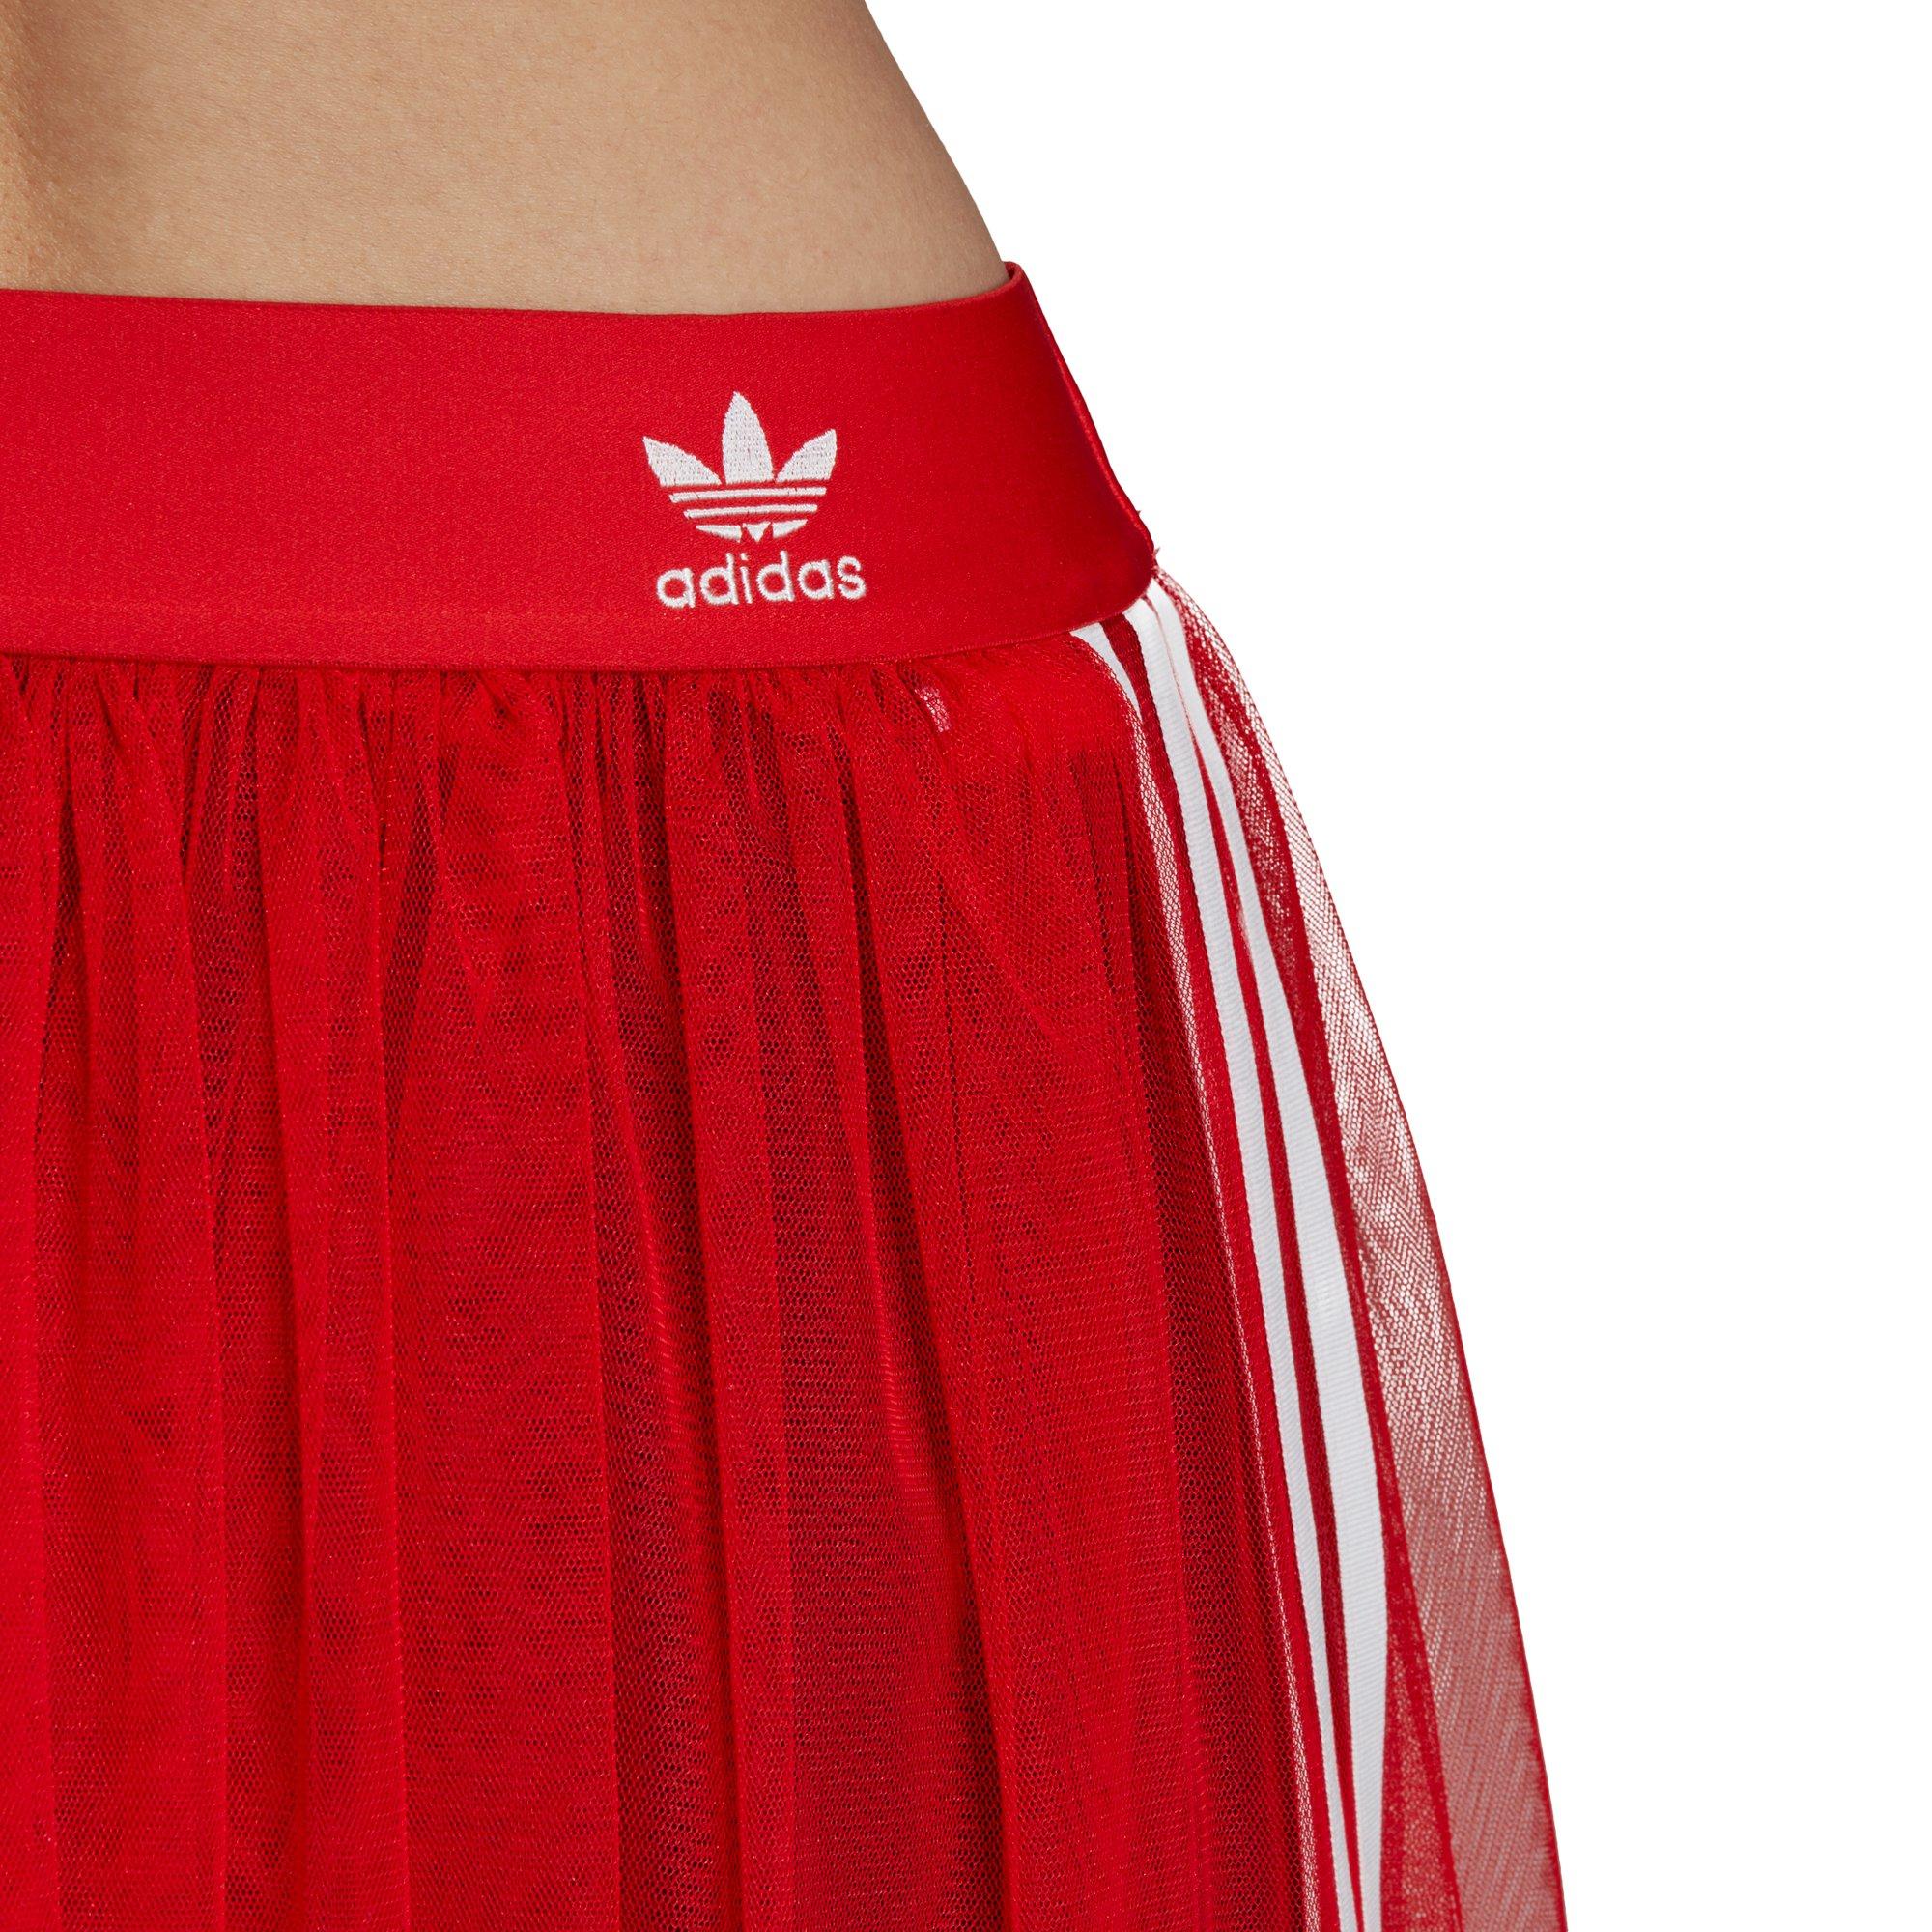 red tulle adidas skirt